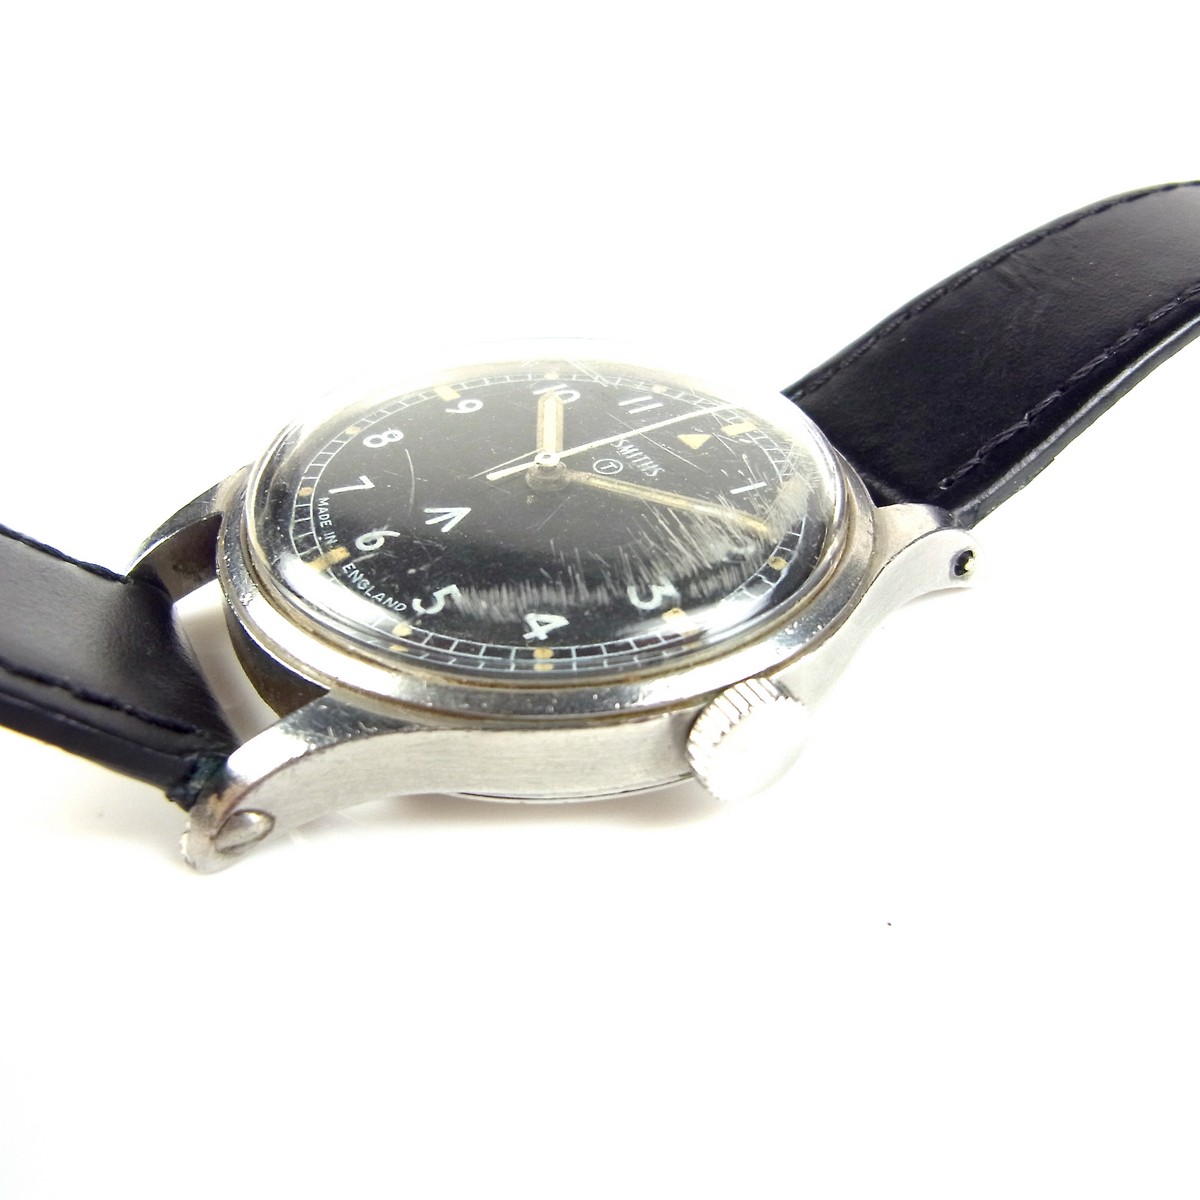 Smiths W10 British Army military issue stainless steel watch. - Image 3 of 4